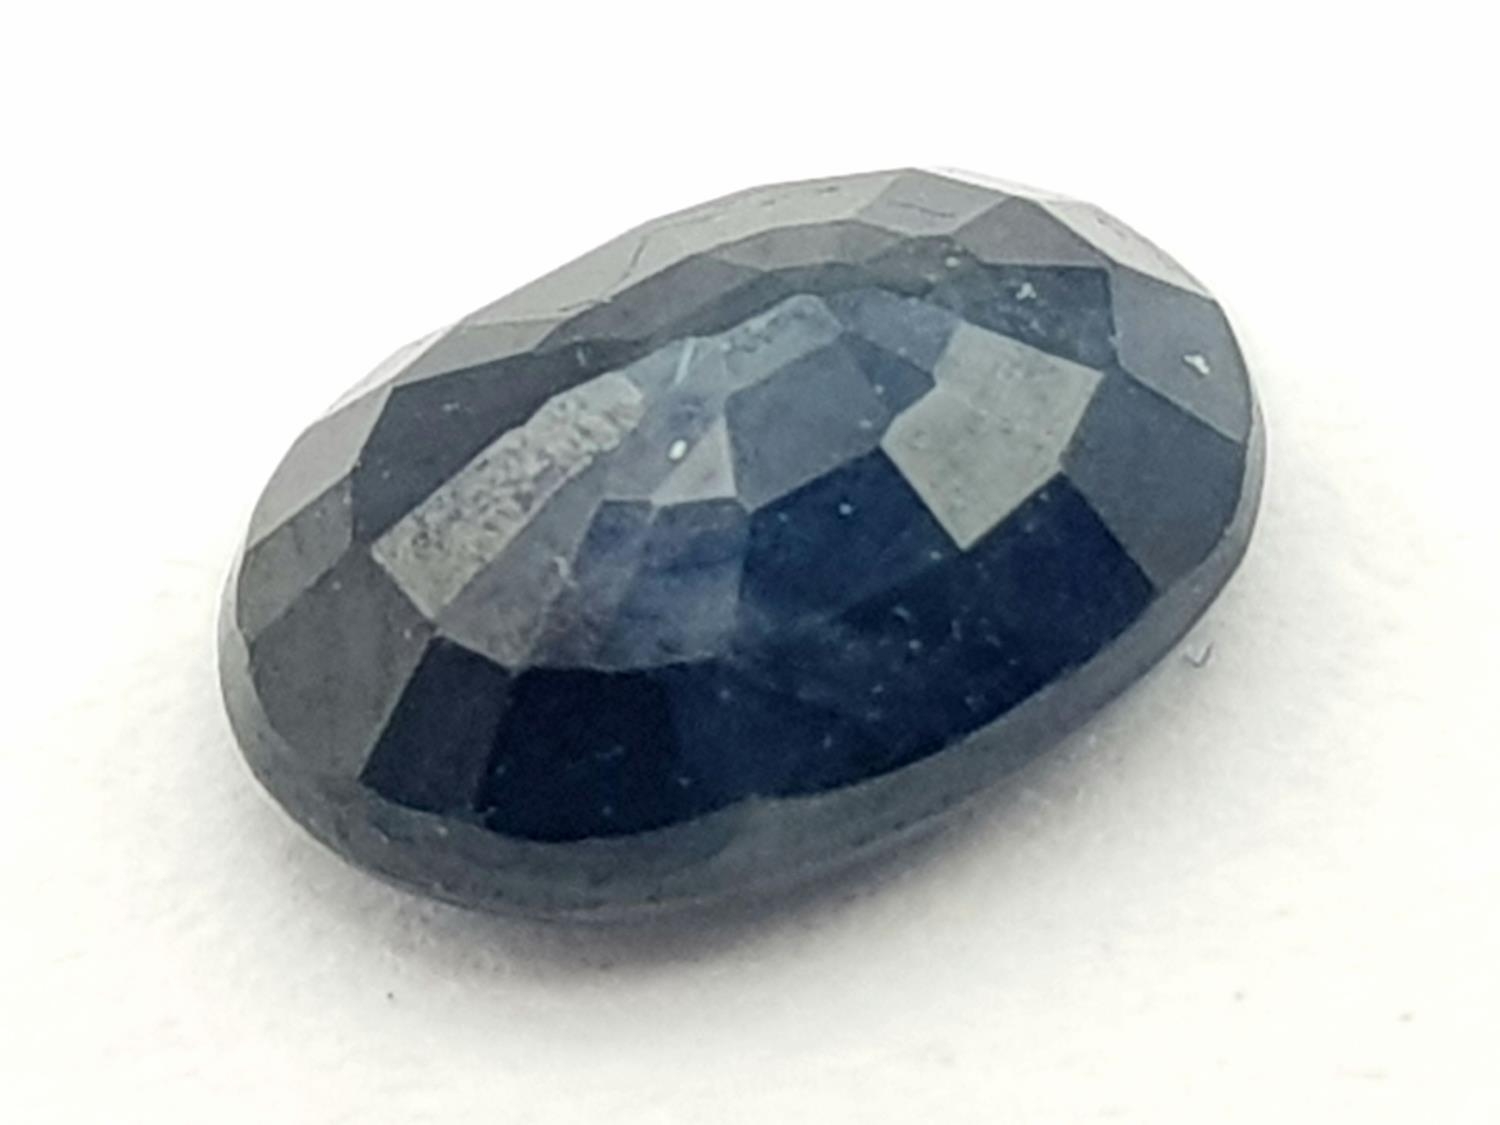 A 1.08ct Madagascan Blue Sapphire - GGI Certified. - Image 4 of 6